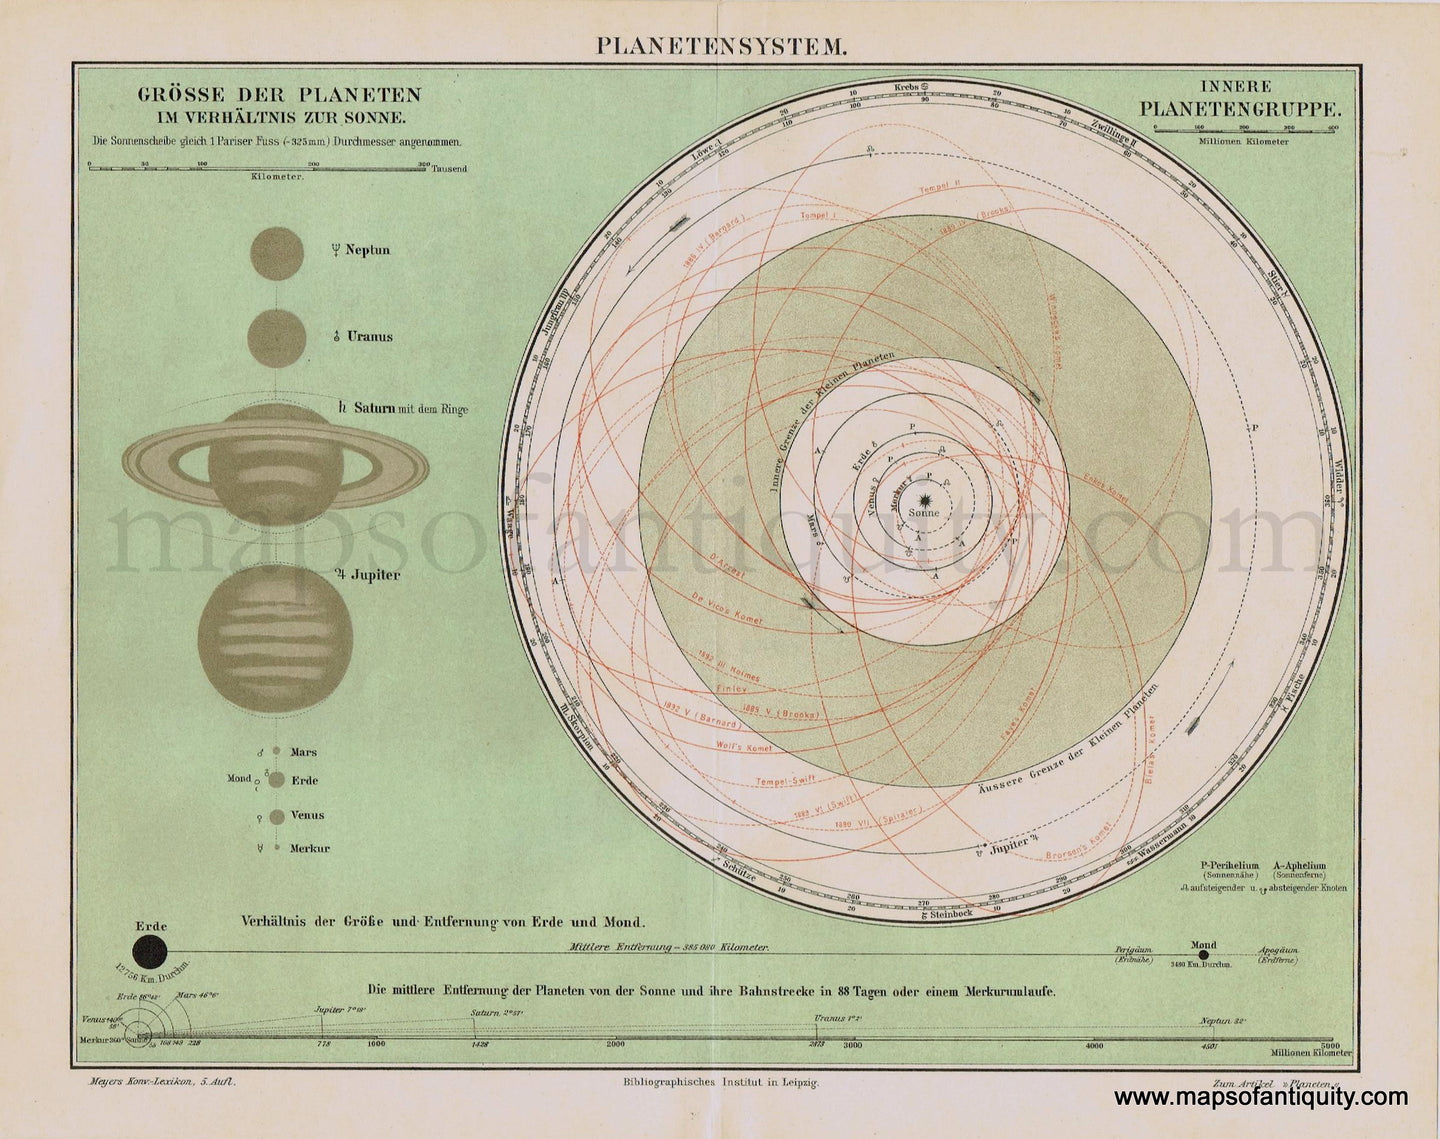 Antique-Printed-Color-Map-Solar-System-Celestial-Planets-Planetary-German-Planetensystem-Meyers-1800s-19th-century-Maps-of-Antiquity